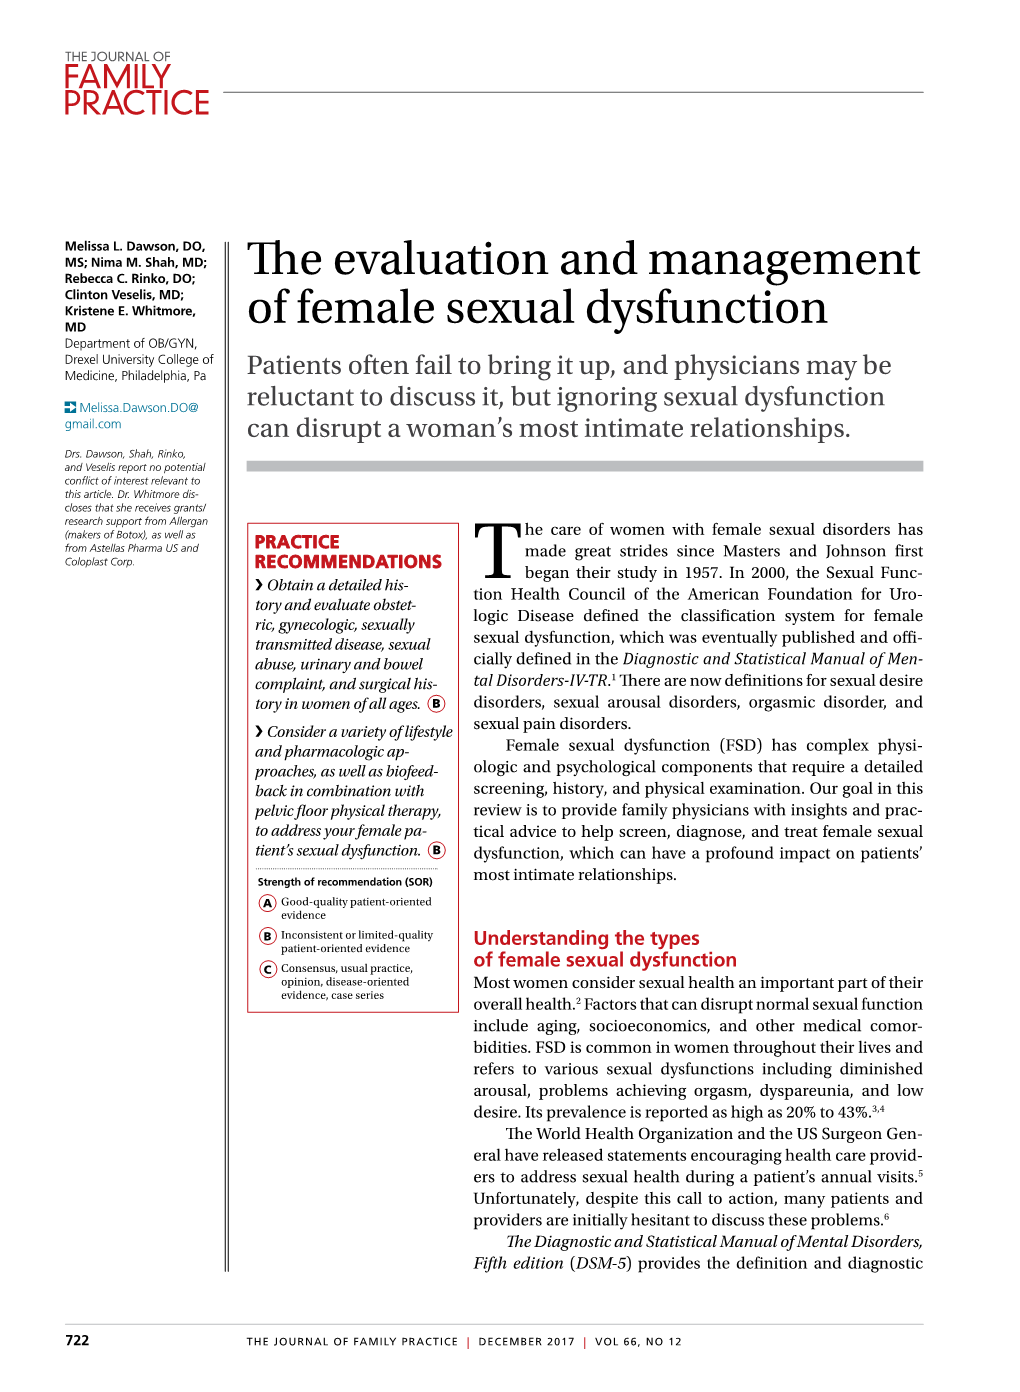 The Evaluation and Management of Female Sexual Dysfunction